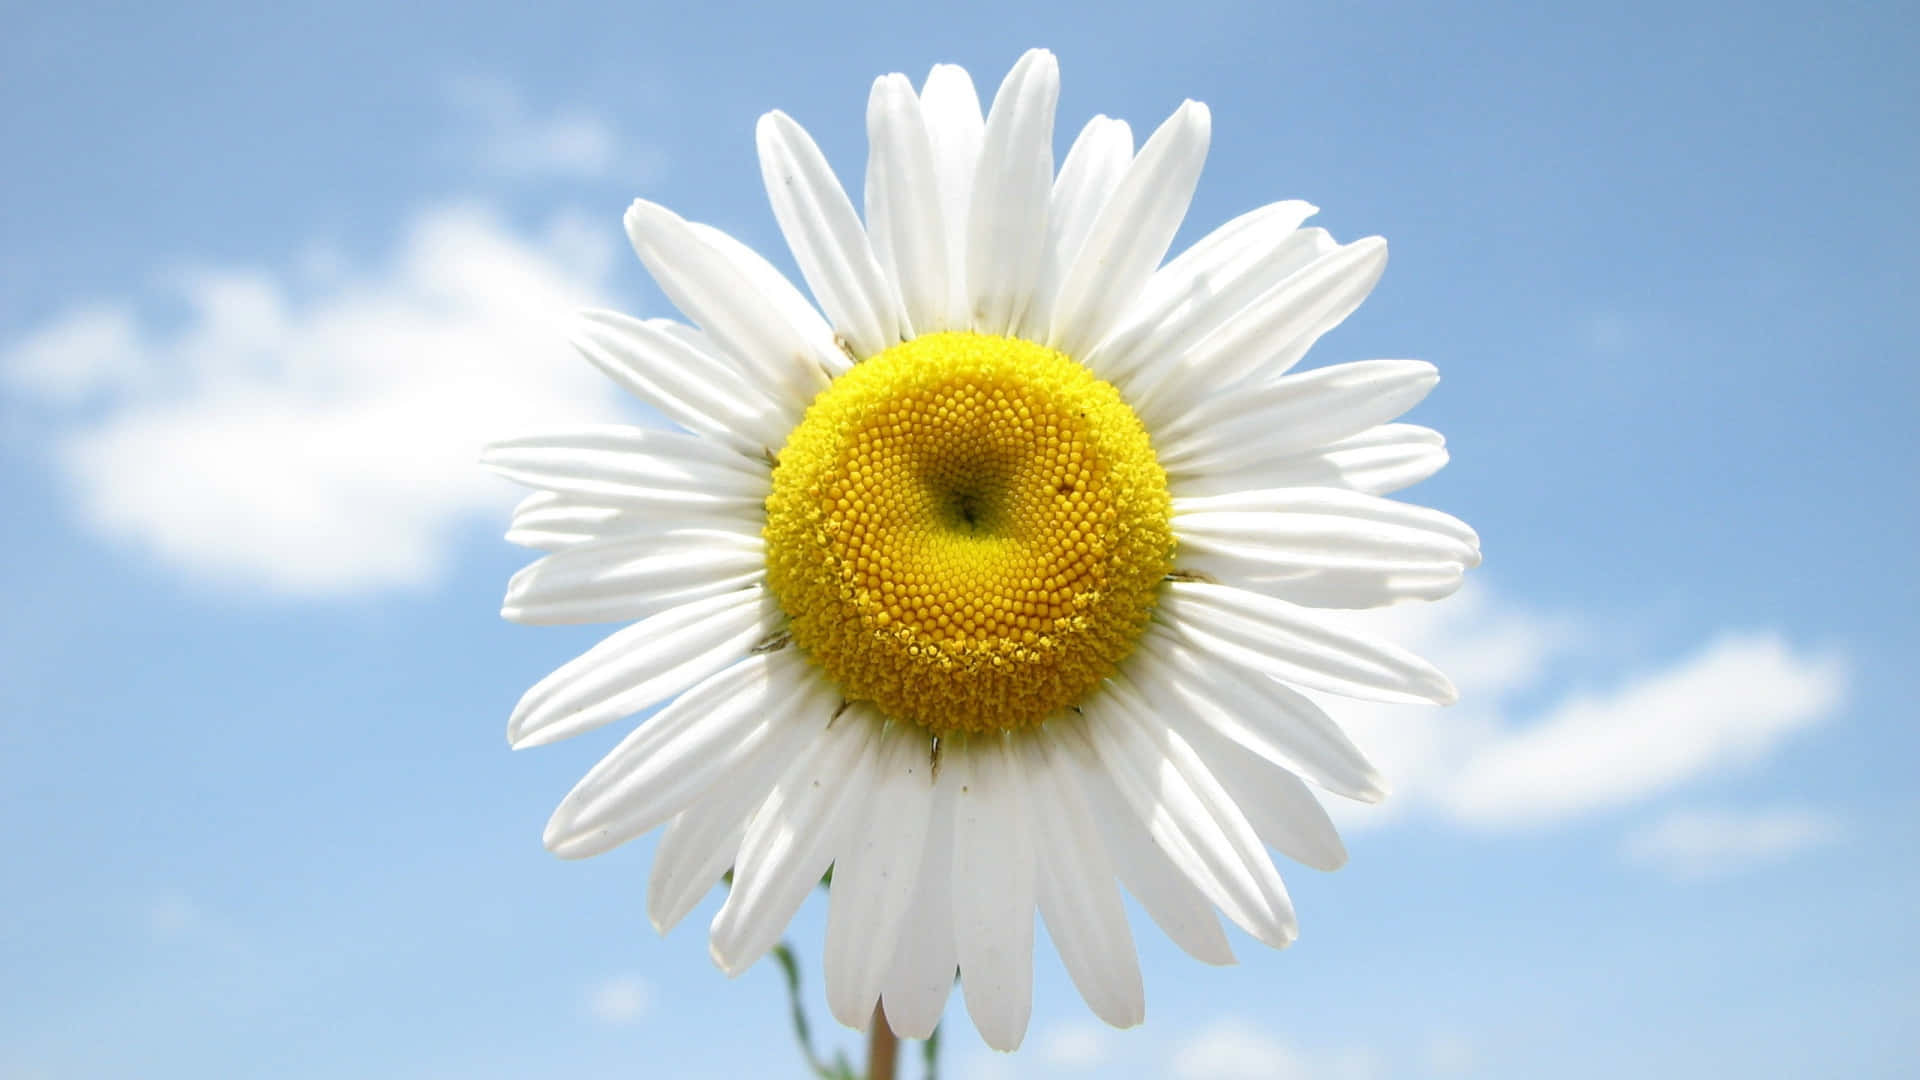 A fun and classic flower, the Daisy, blooming in the sun